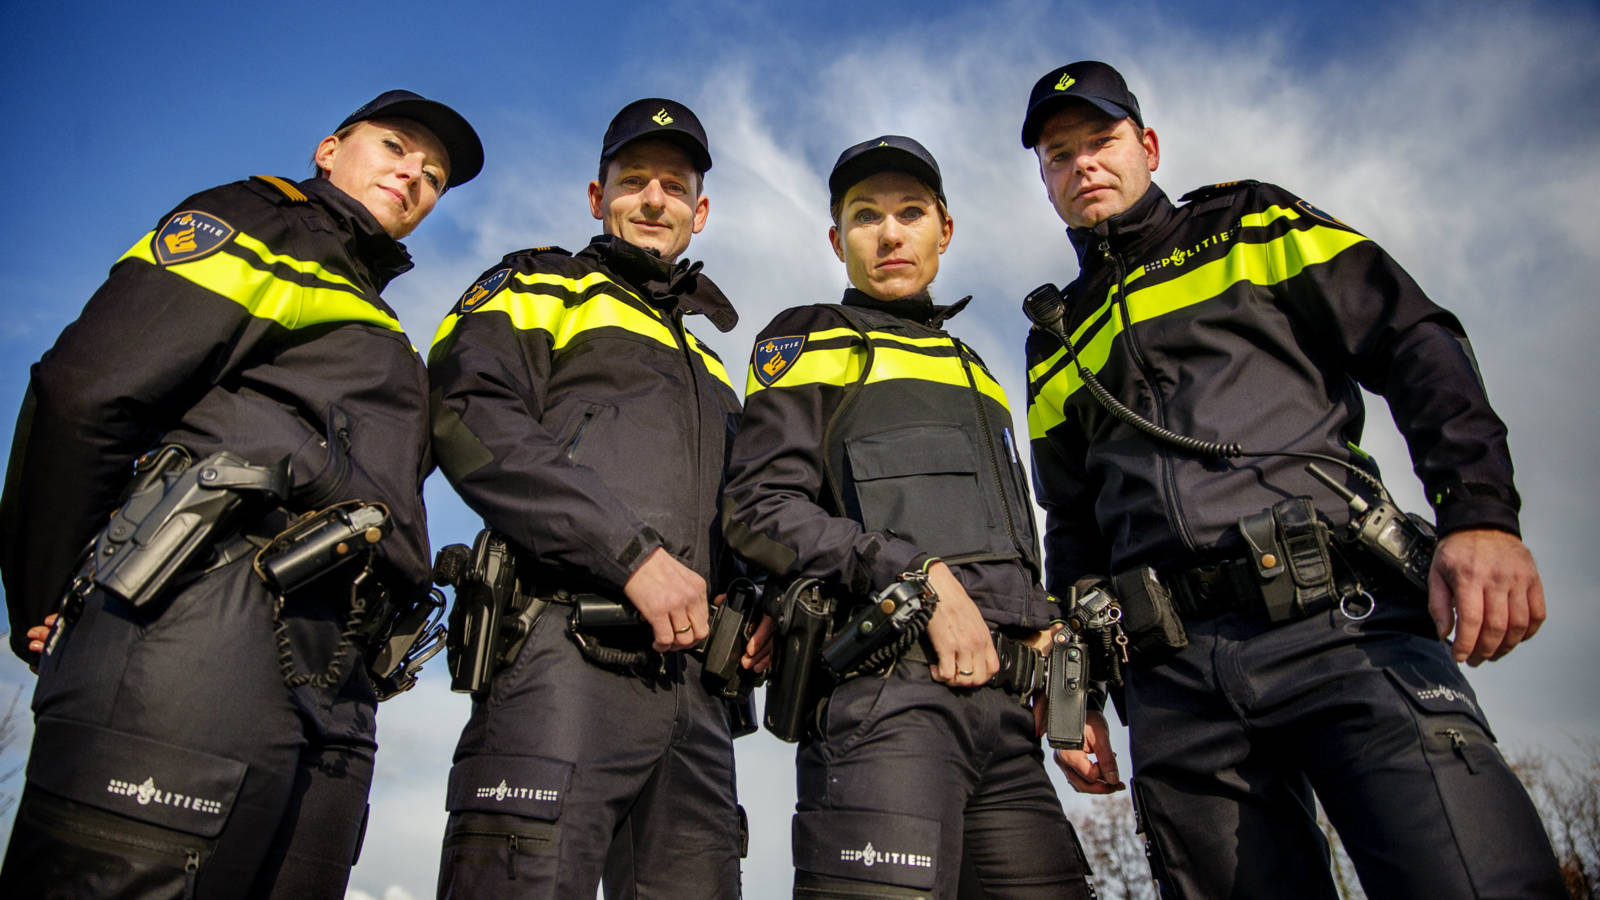 Dutch police uncomfortable with being accused of racism